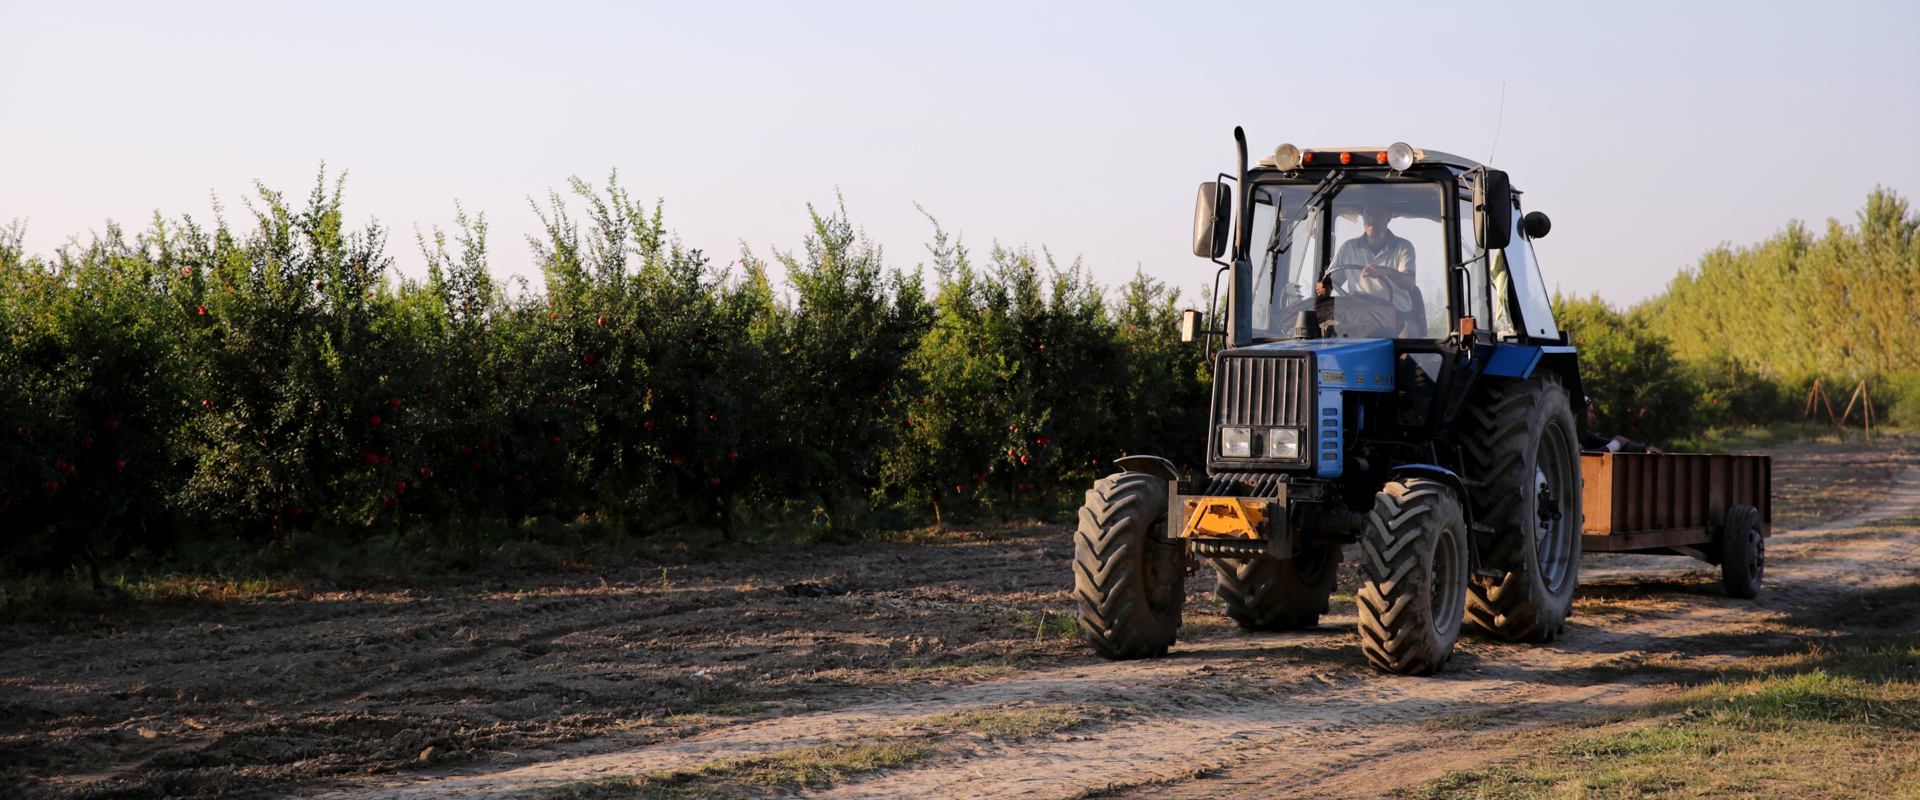 3 guidance systems for older tractors you should consider